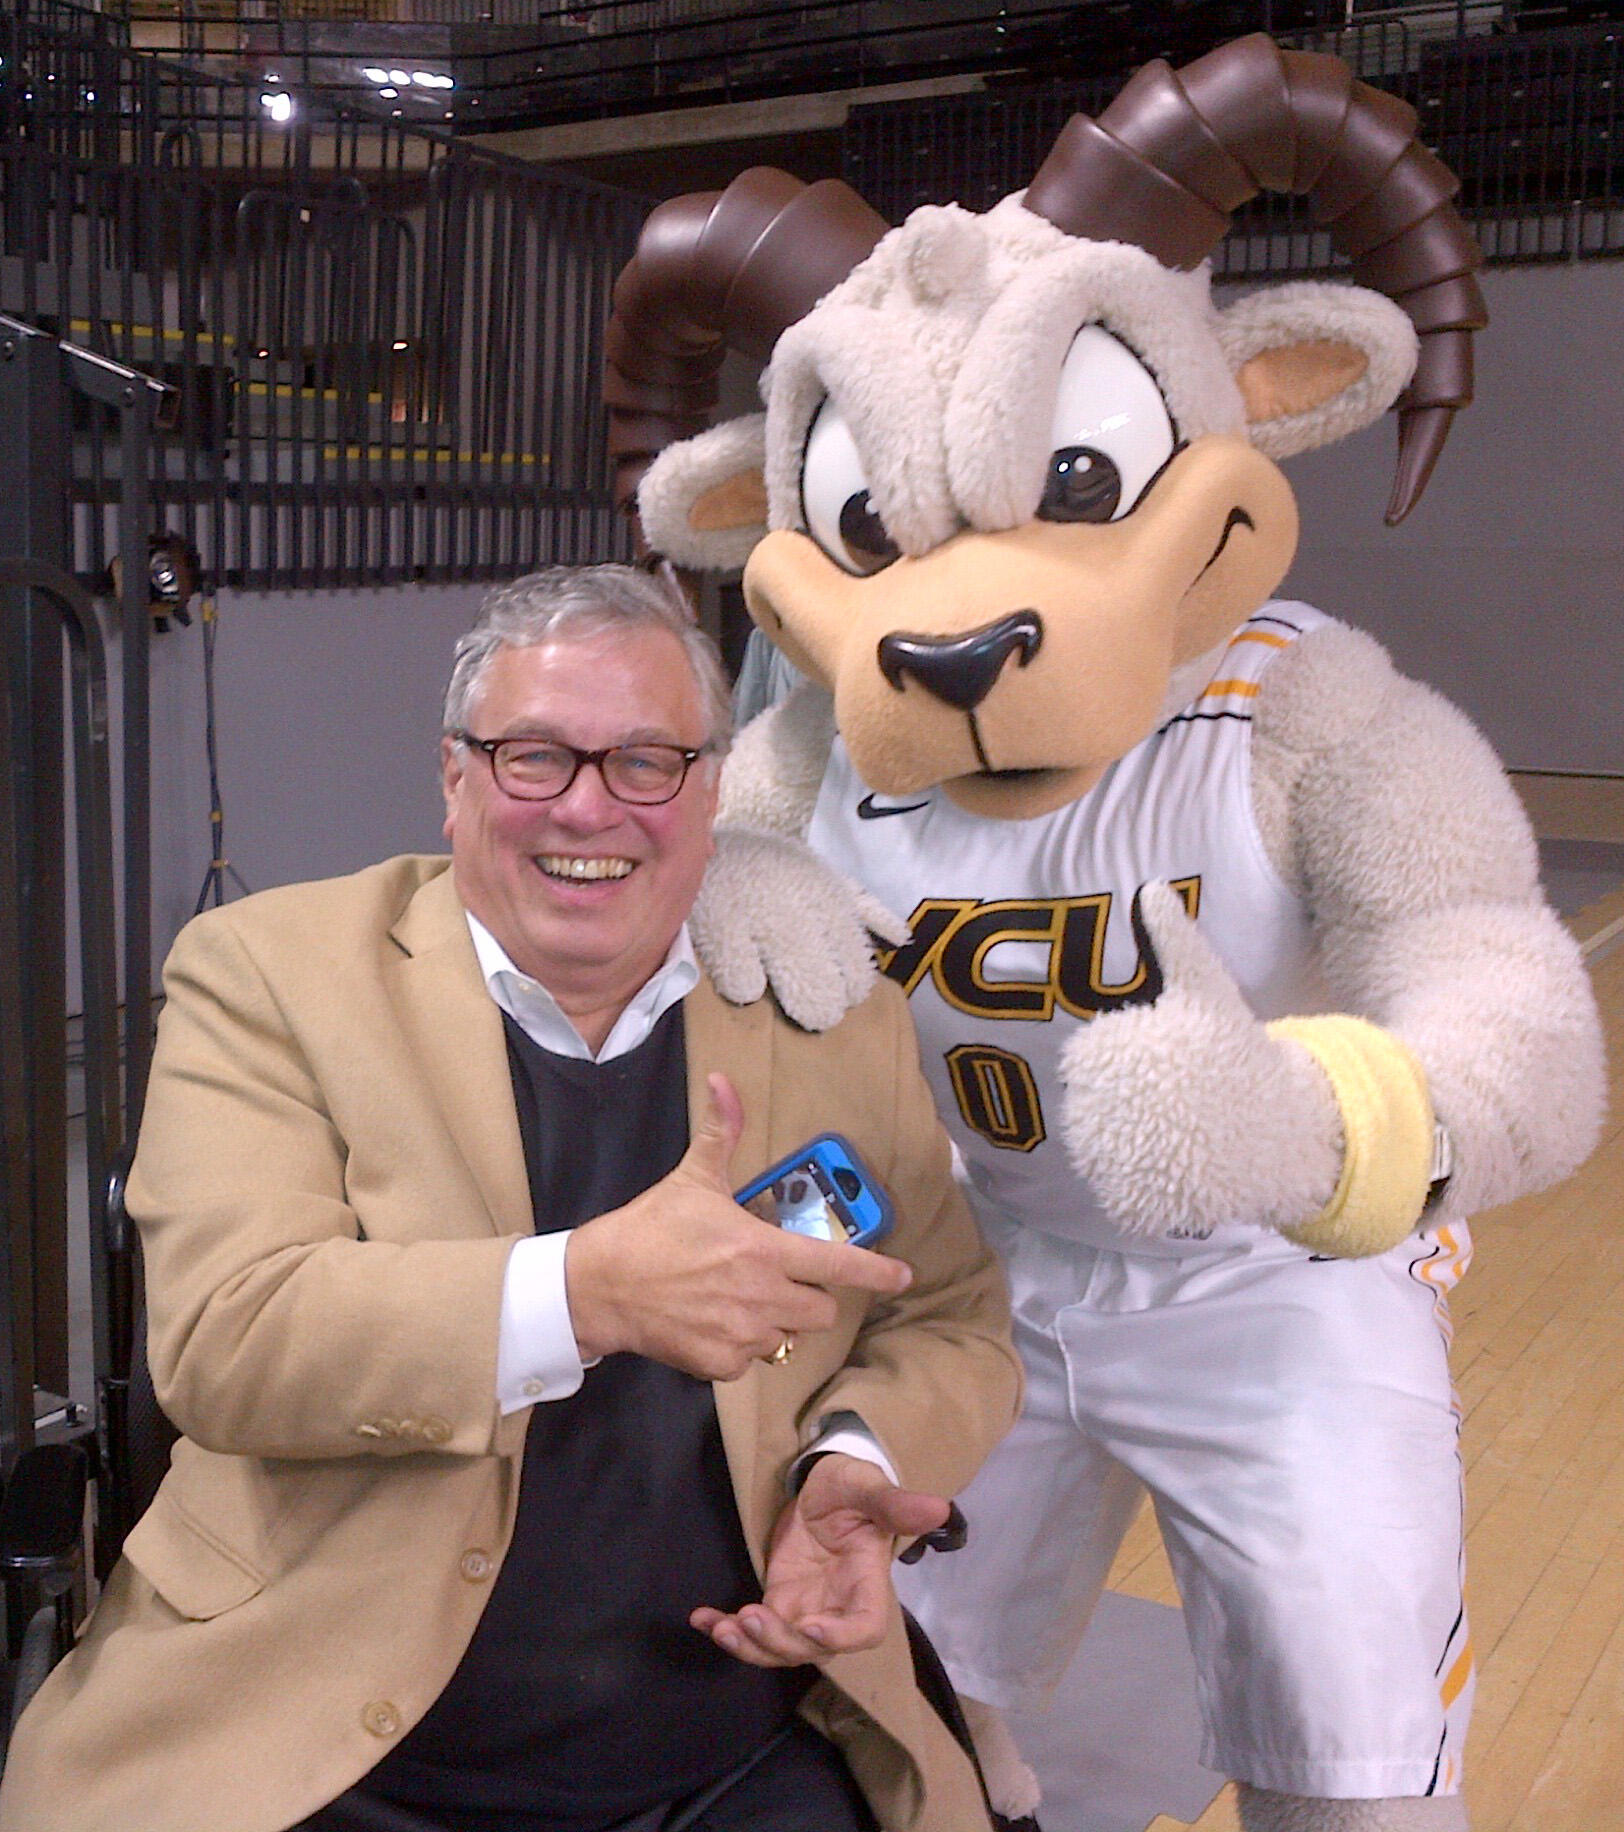 Jim Rothrock with Rodney the Ram at a VCU basketball game. 